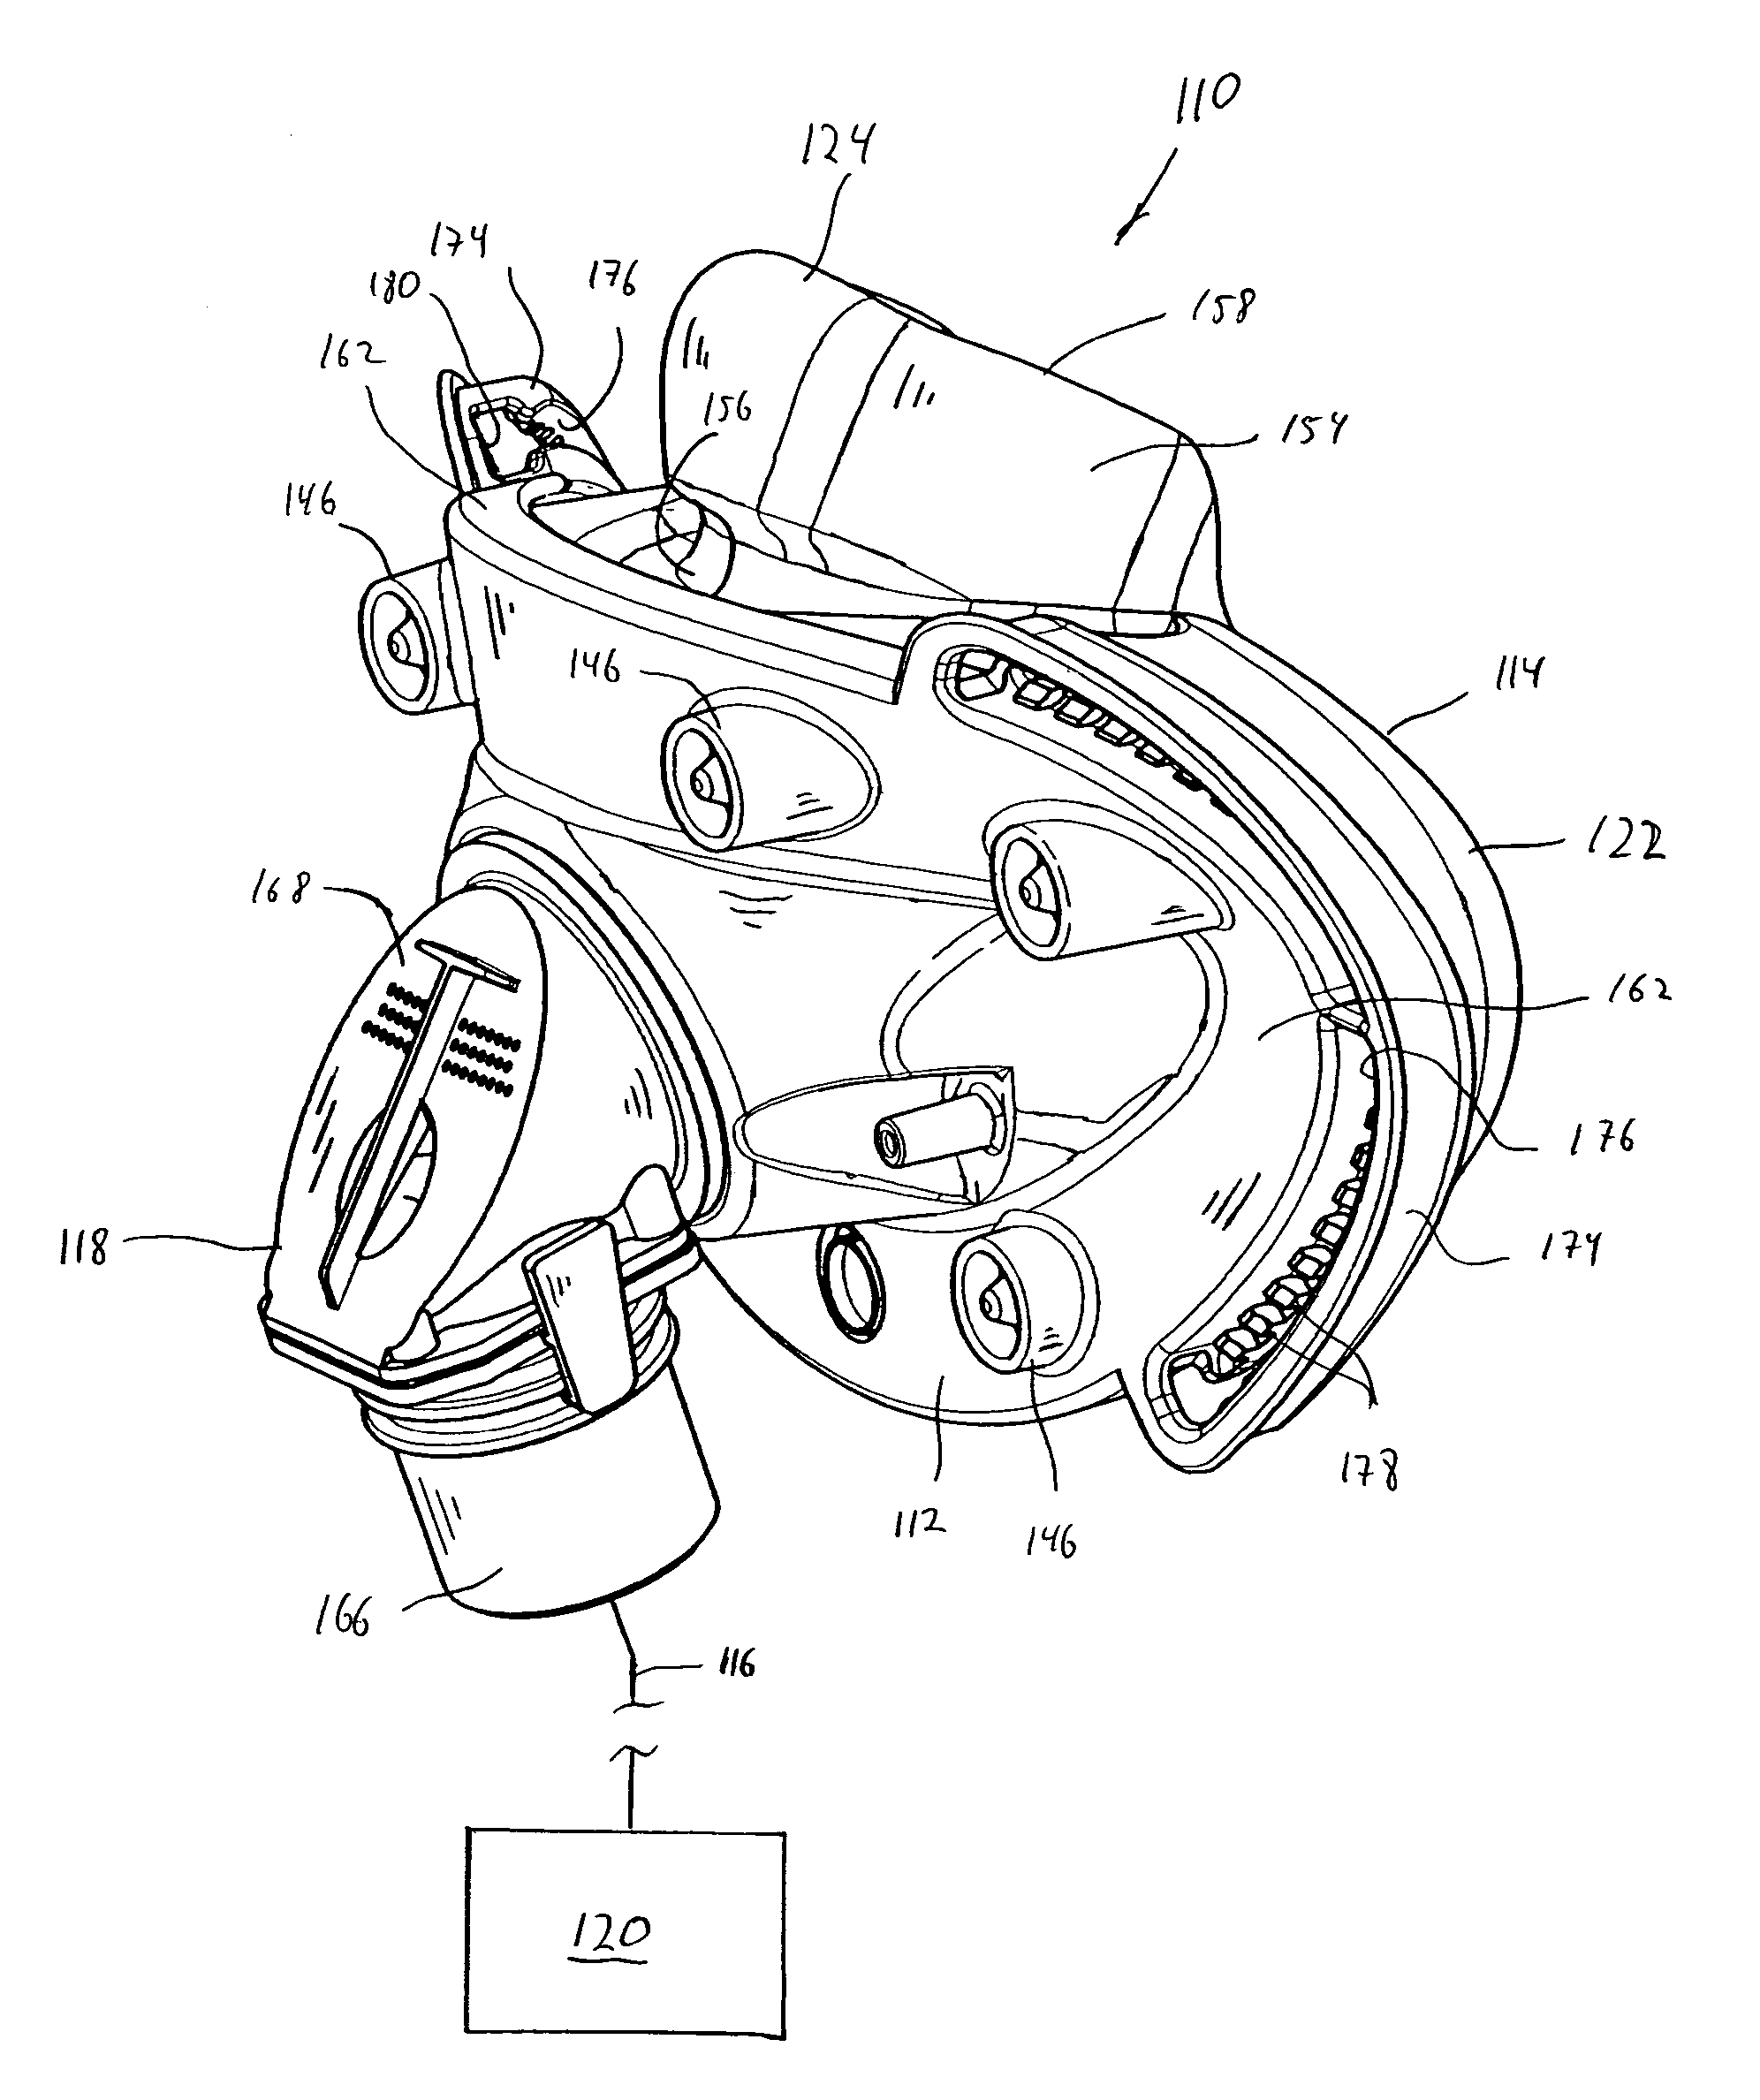 Full face respiratory mask with integrated nasal interface